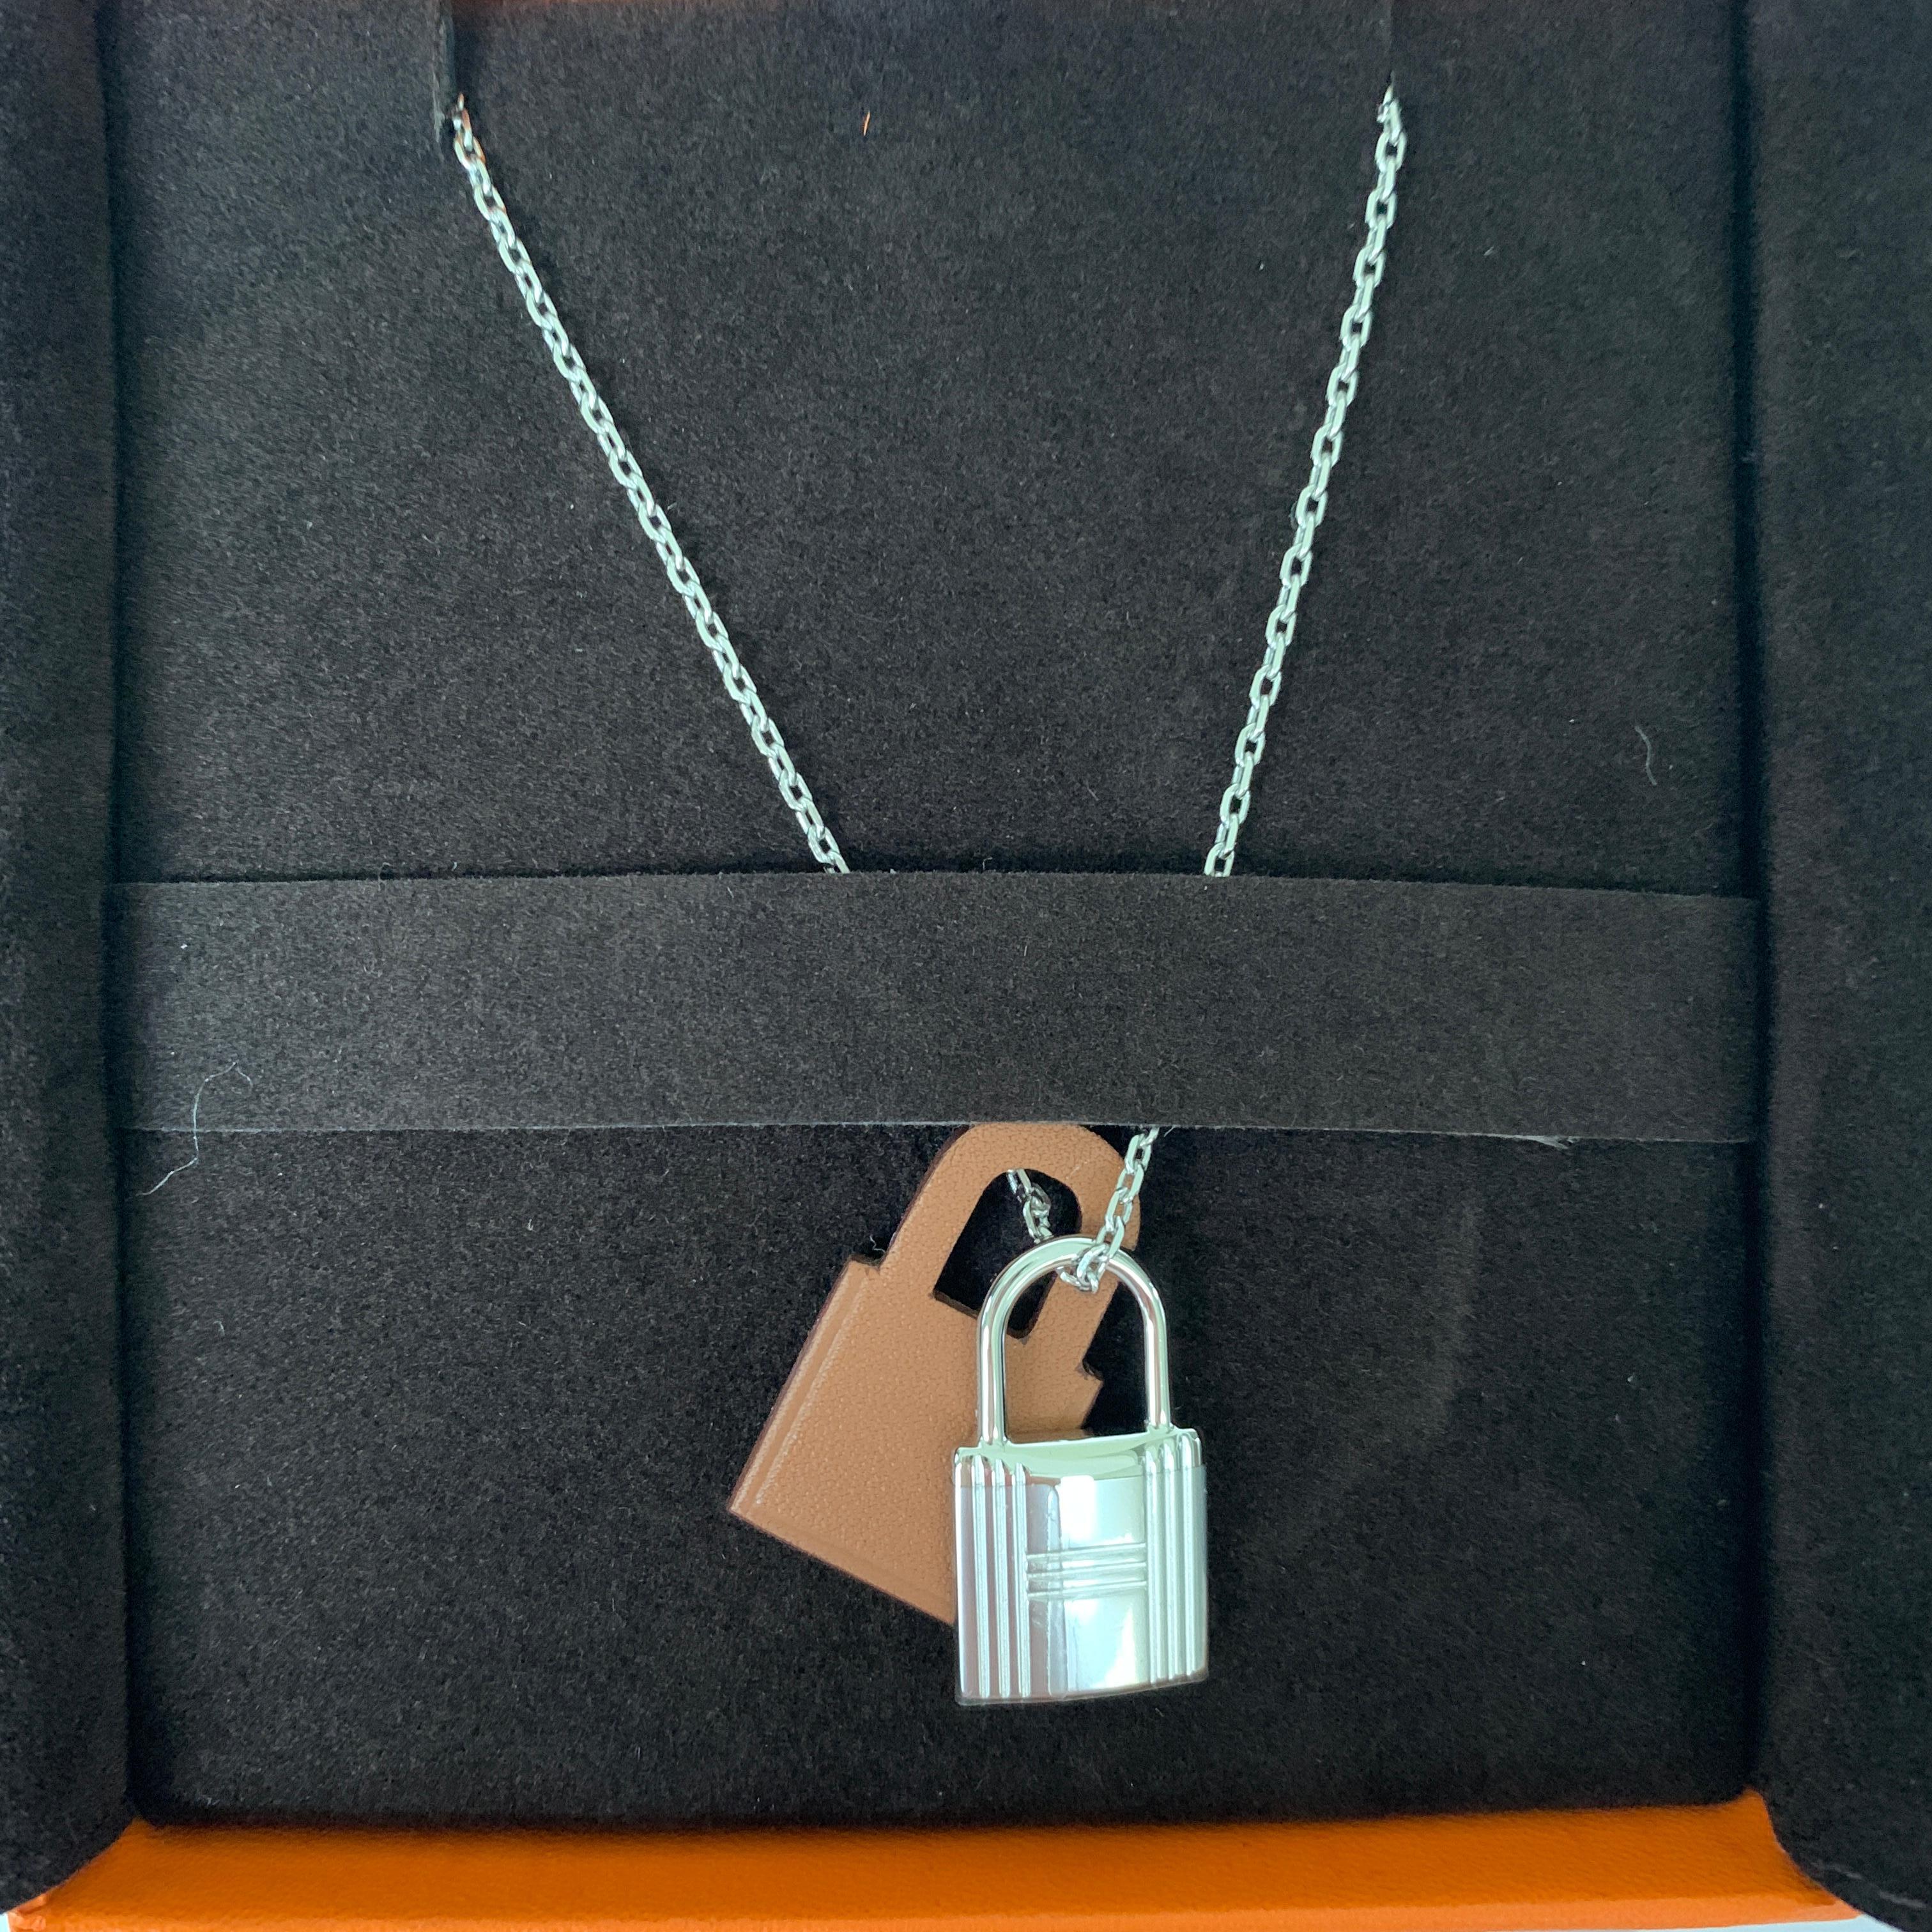 Hermes O'Kelly Pendant Necklace
Small Model
Gold
Pendant in Swift calfskin with palladium plated hardware.
The O’Kelly story gives pride of place to the eponymous bag’s padlock. Here, it is slimmed down and attached to a stylized leather padlock